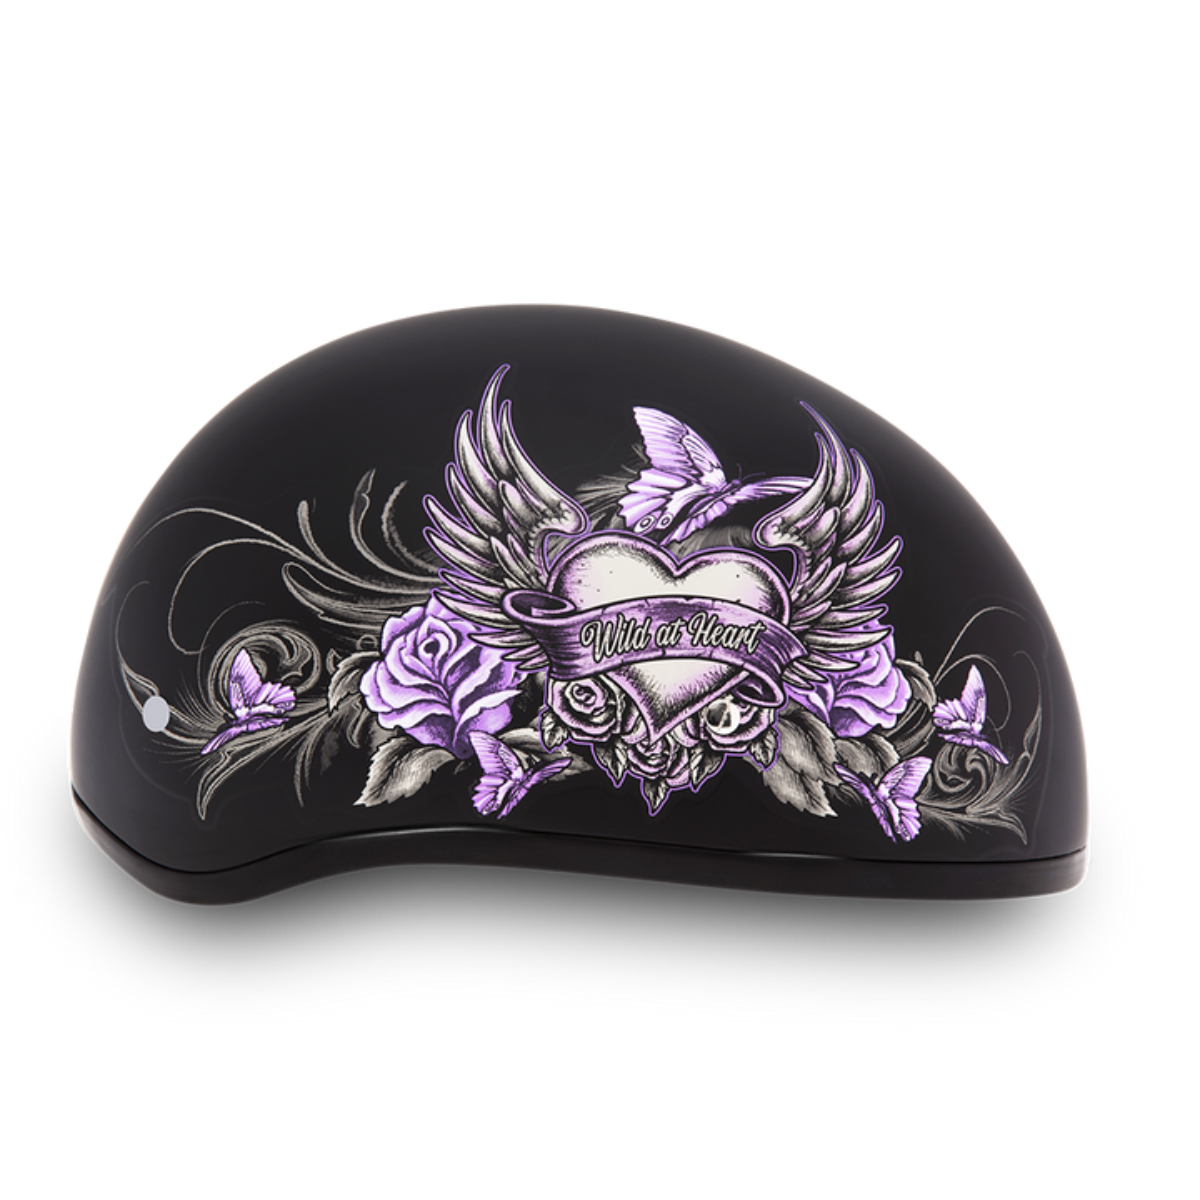 Custom-painted black Daytona D.O.T Skull Cap Helmet with a winged heart and roses design, featuring moisture wicking fabric.